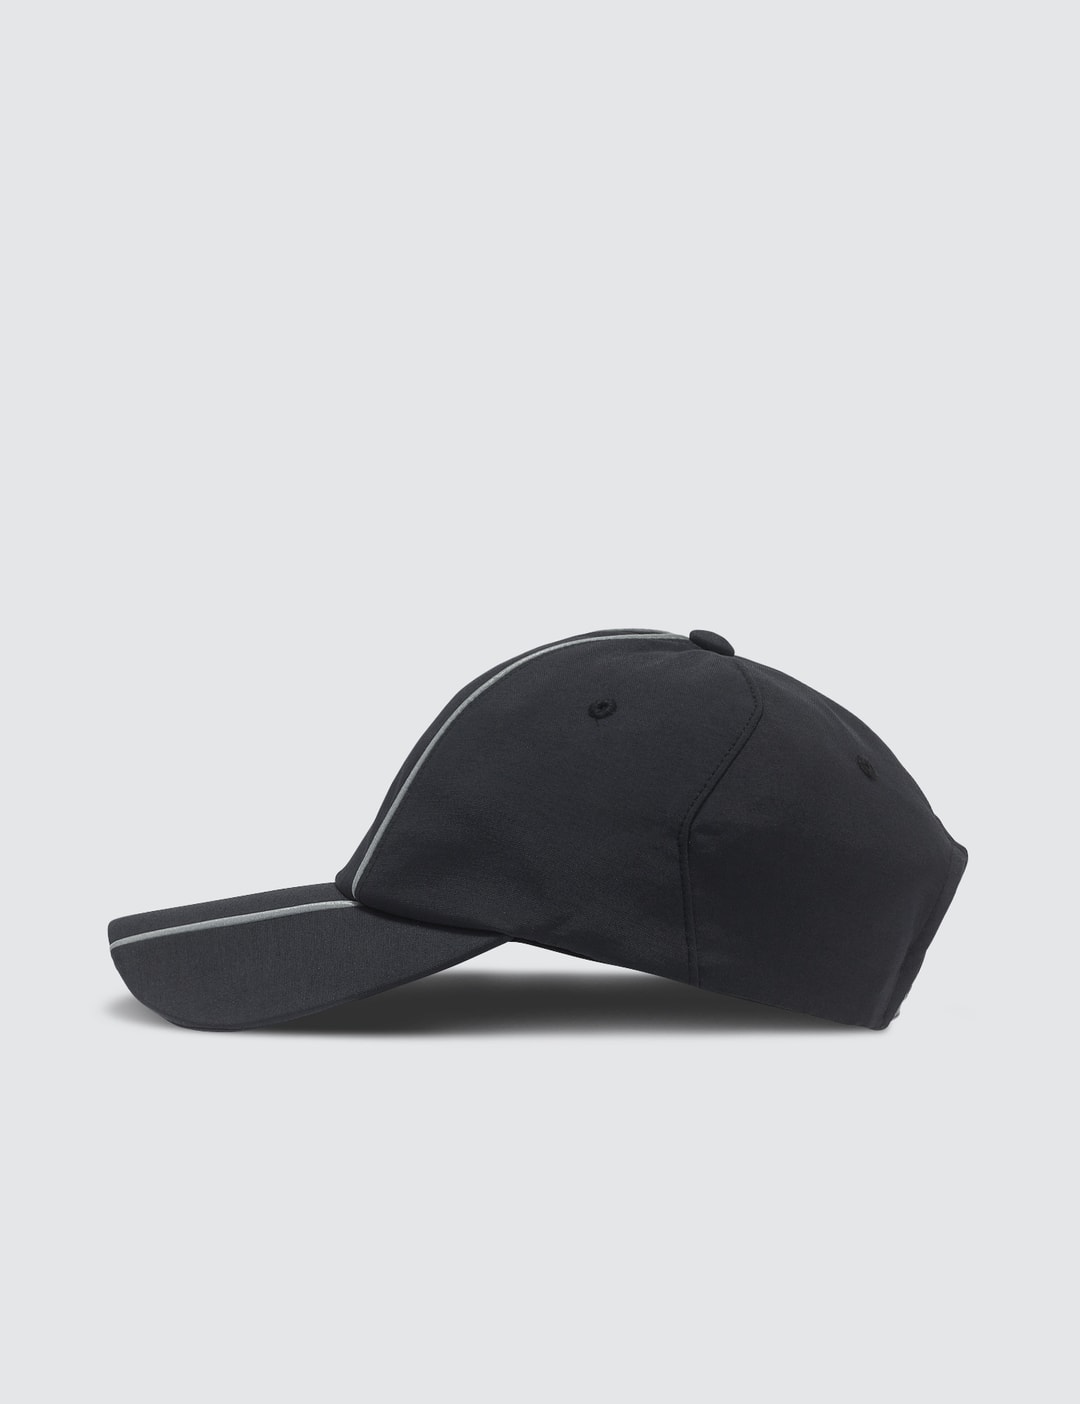 Ader Error - Ader New Logo Cap | HBX - Globally Curated Fashion and ...